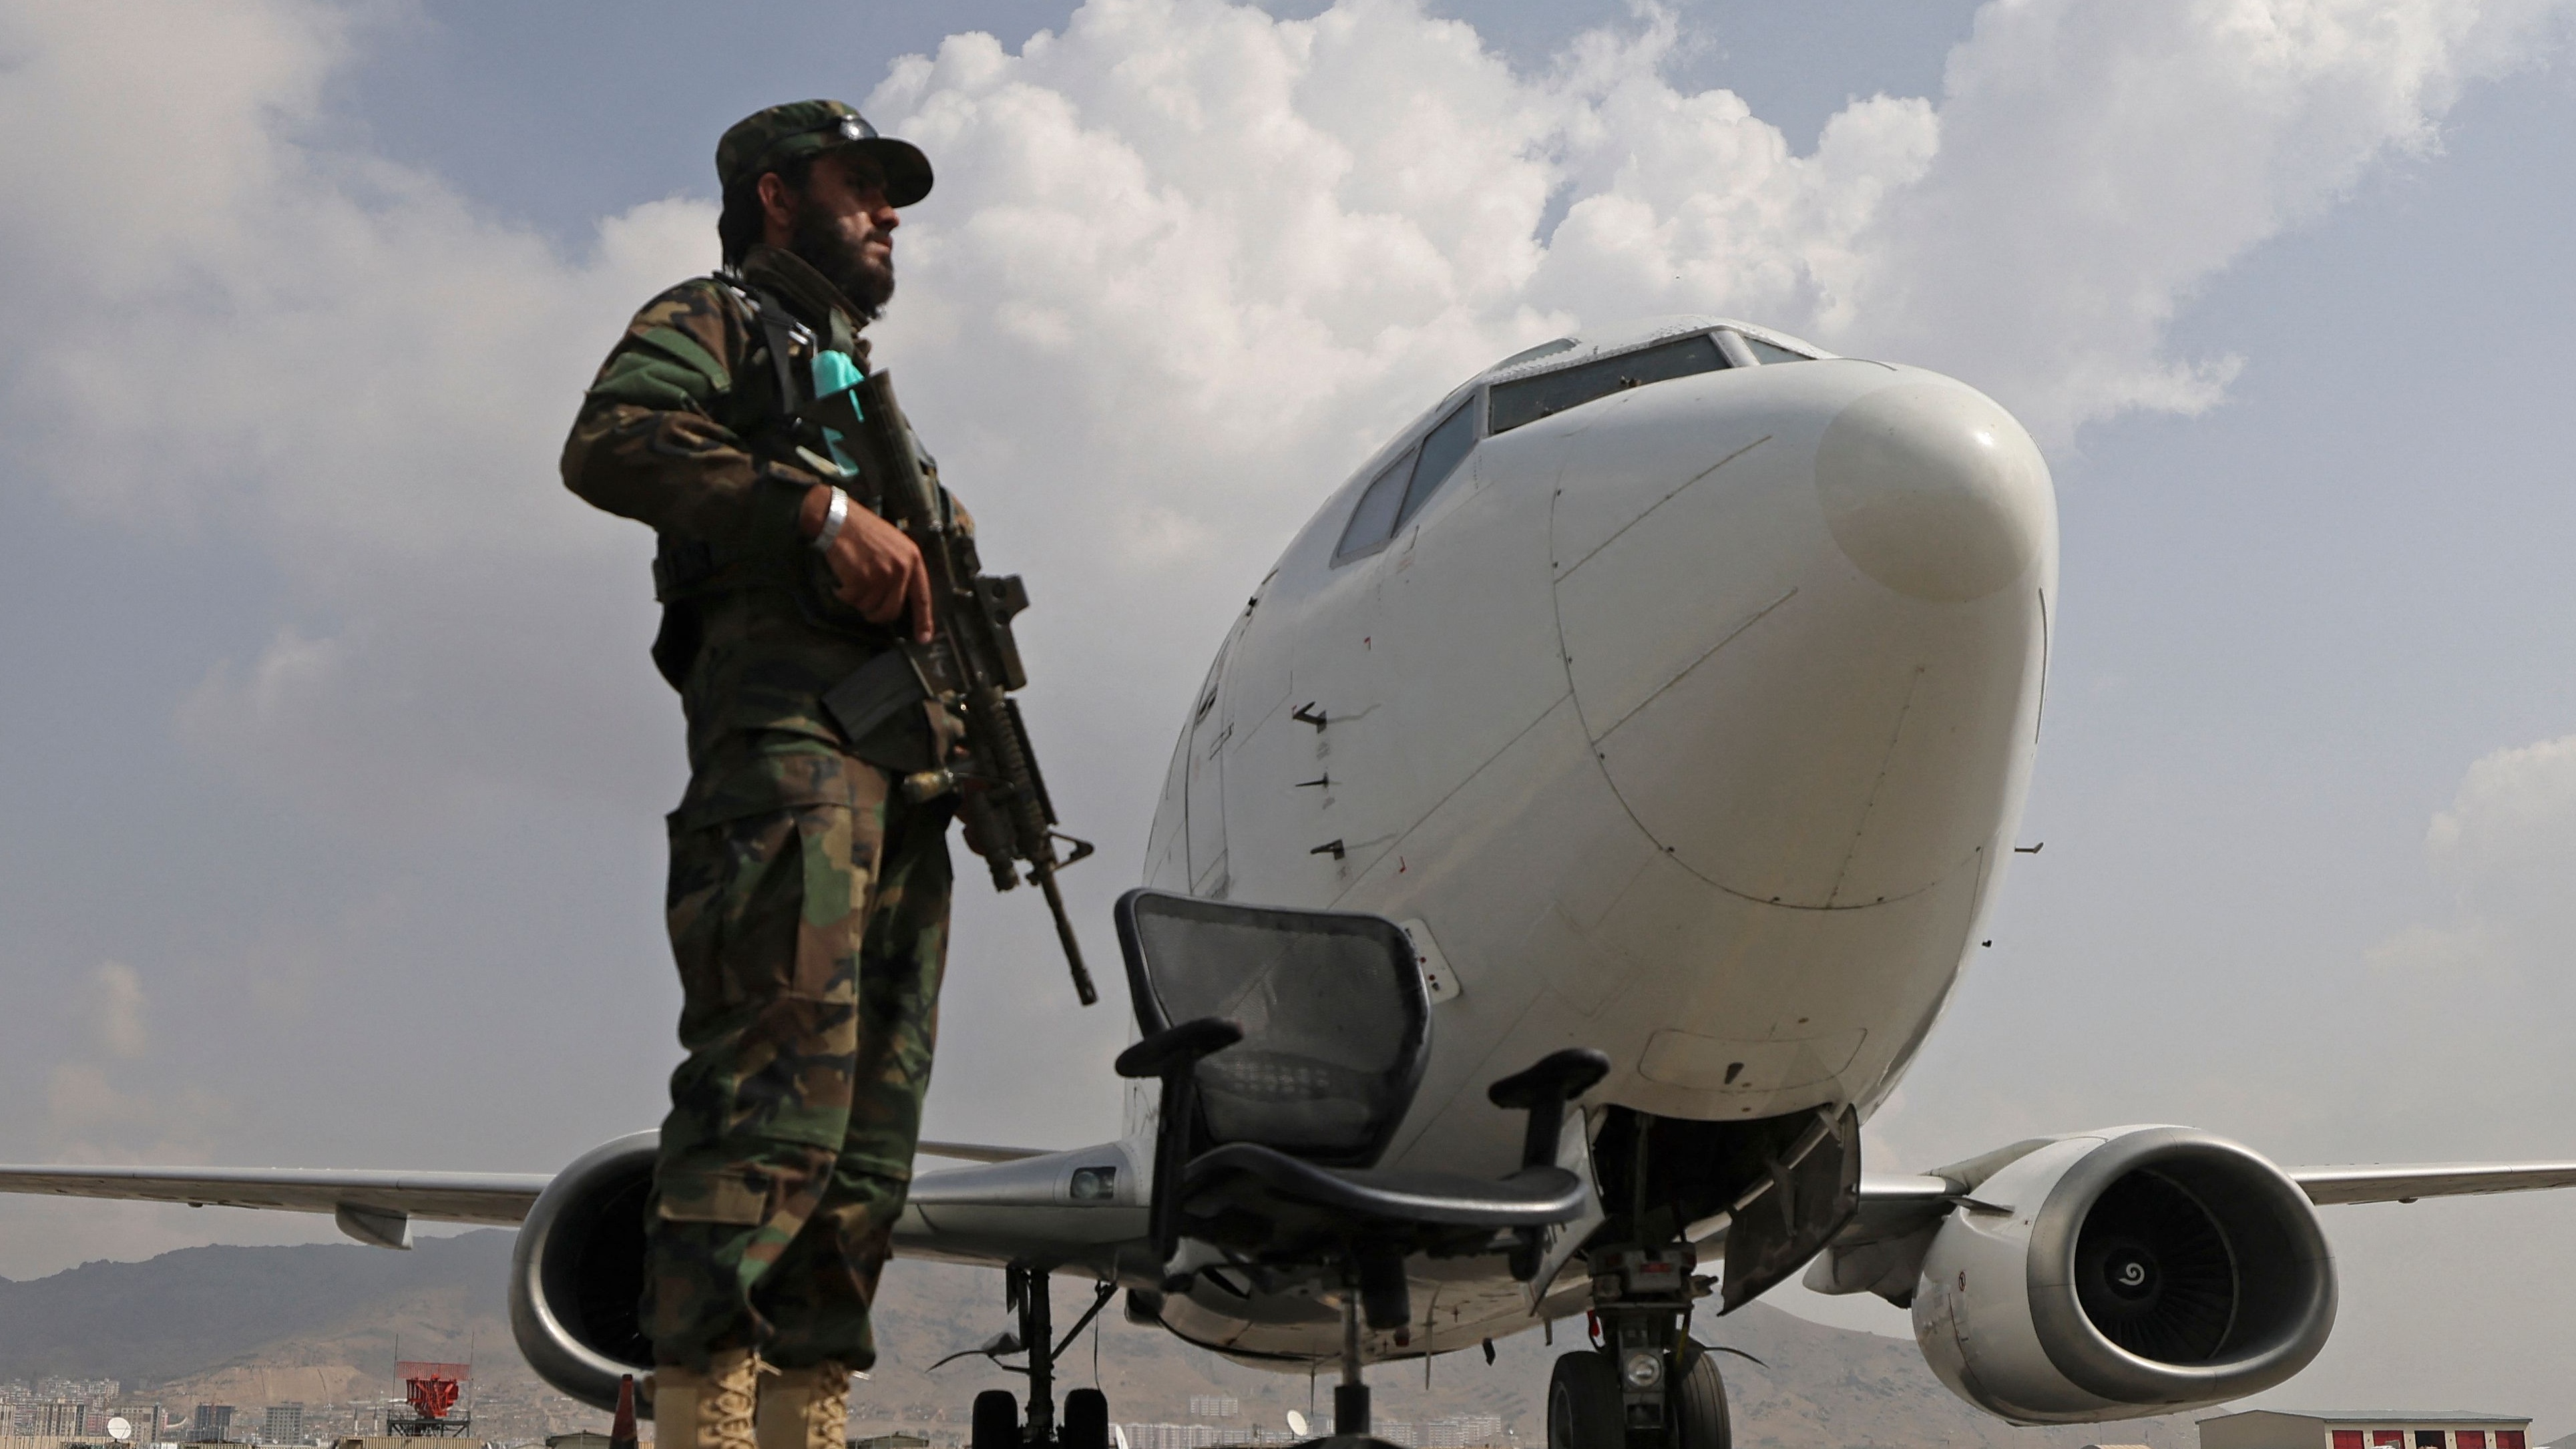 A Taliban fighter stands guard at Hamid Karzai International Airport in Kabul